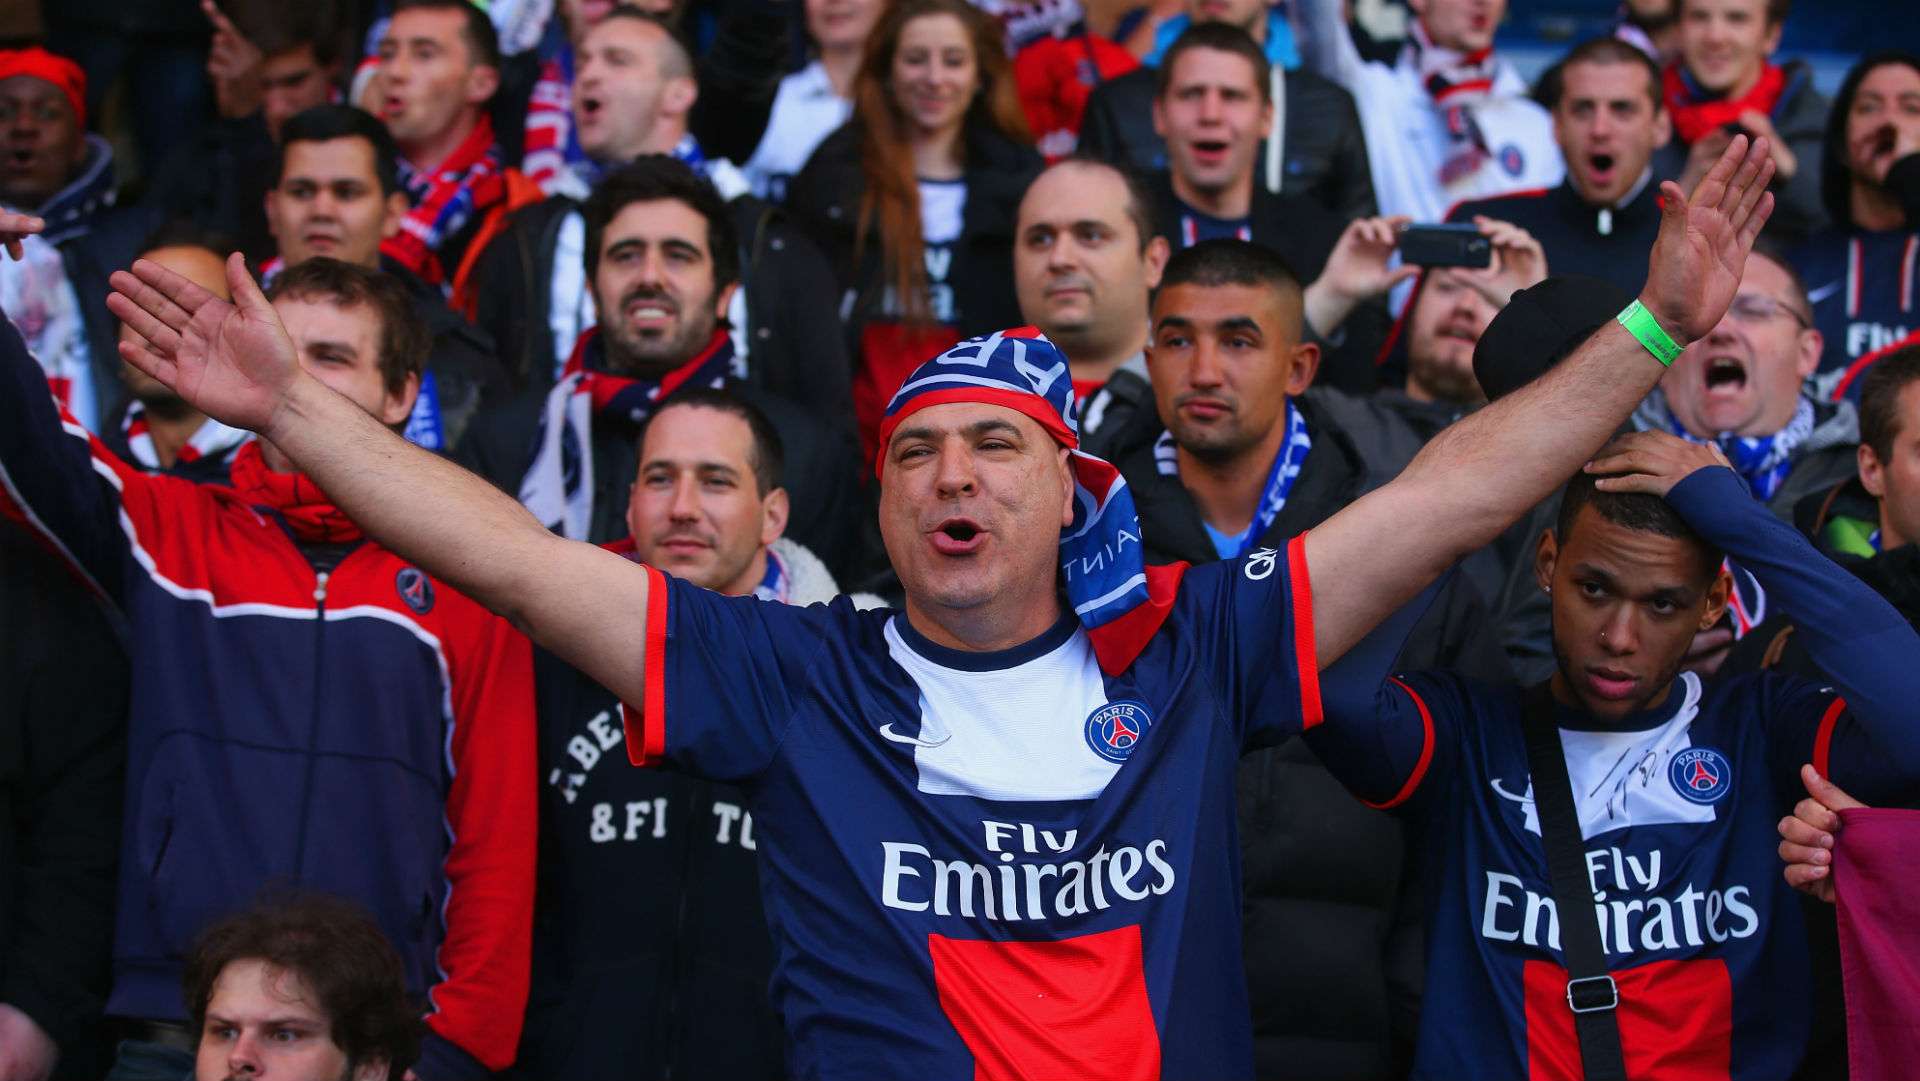 PSG Fans Supporters